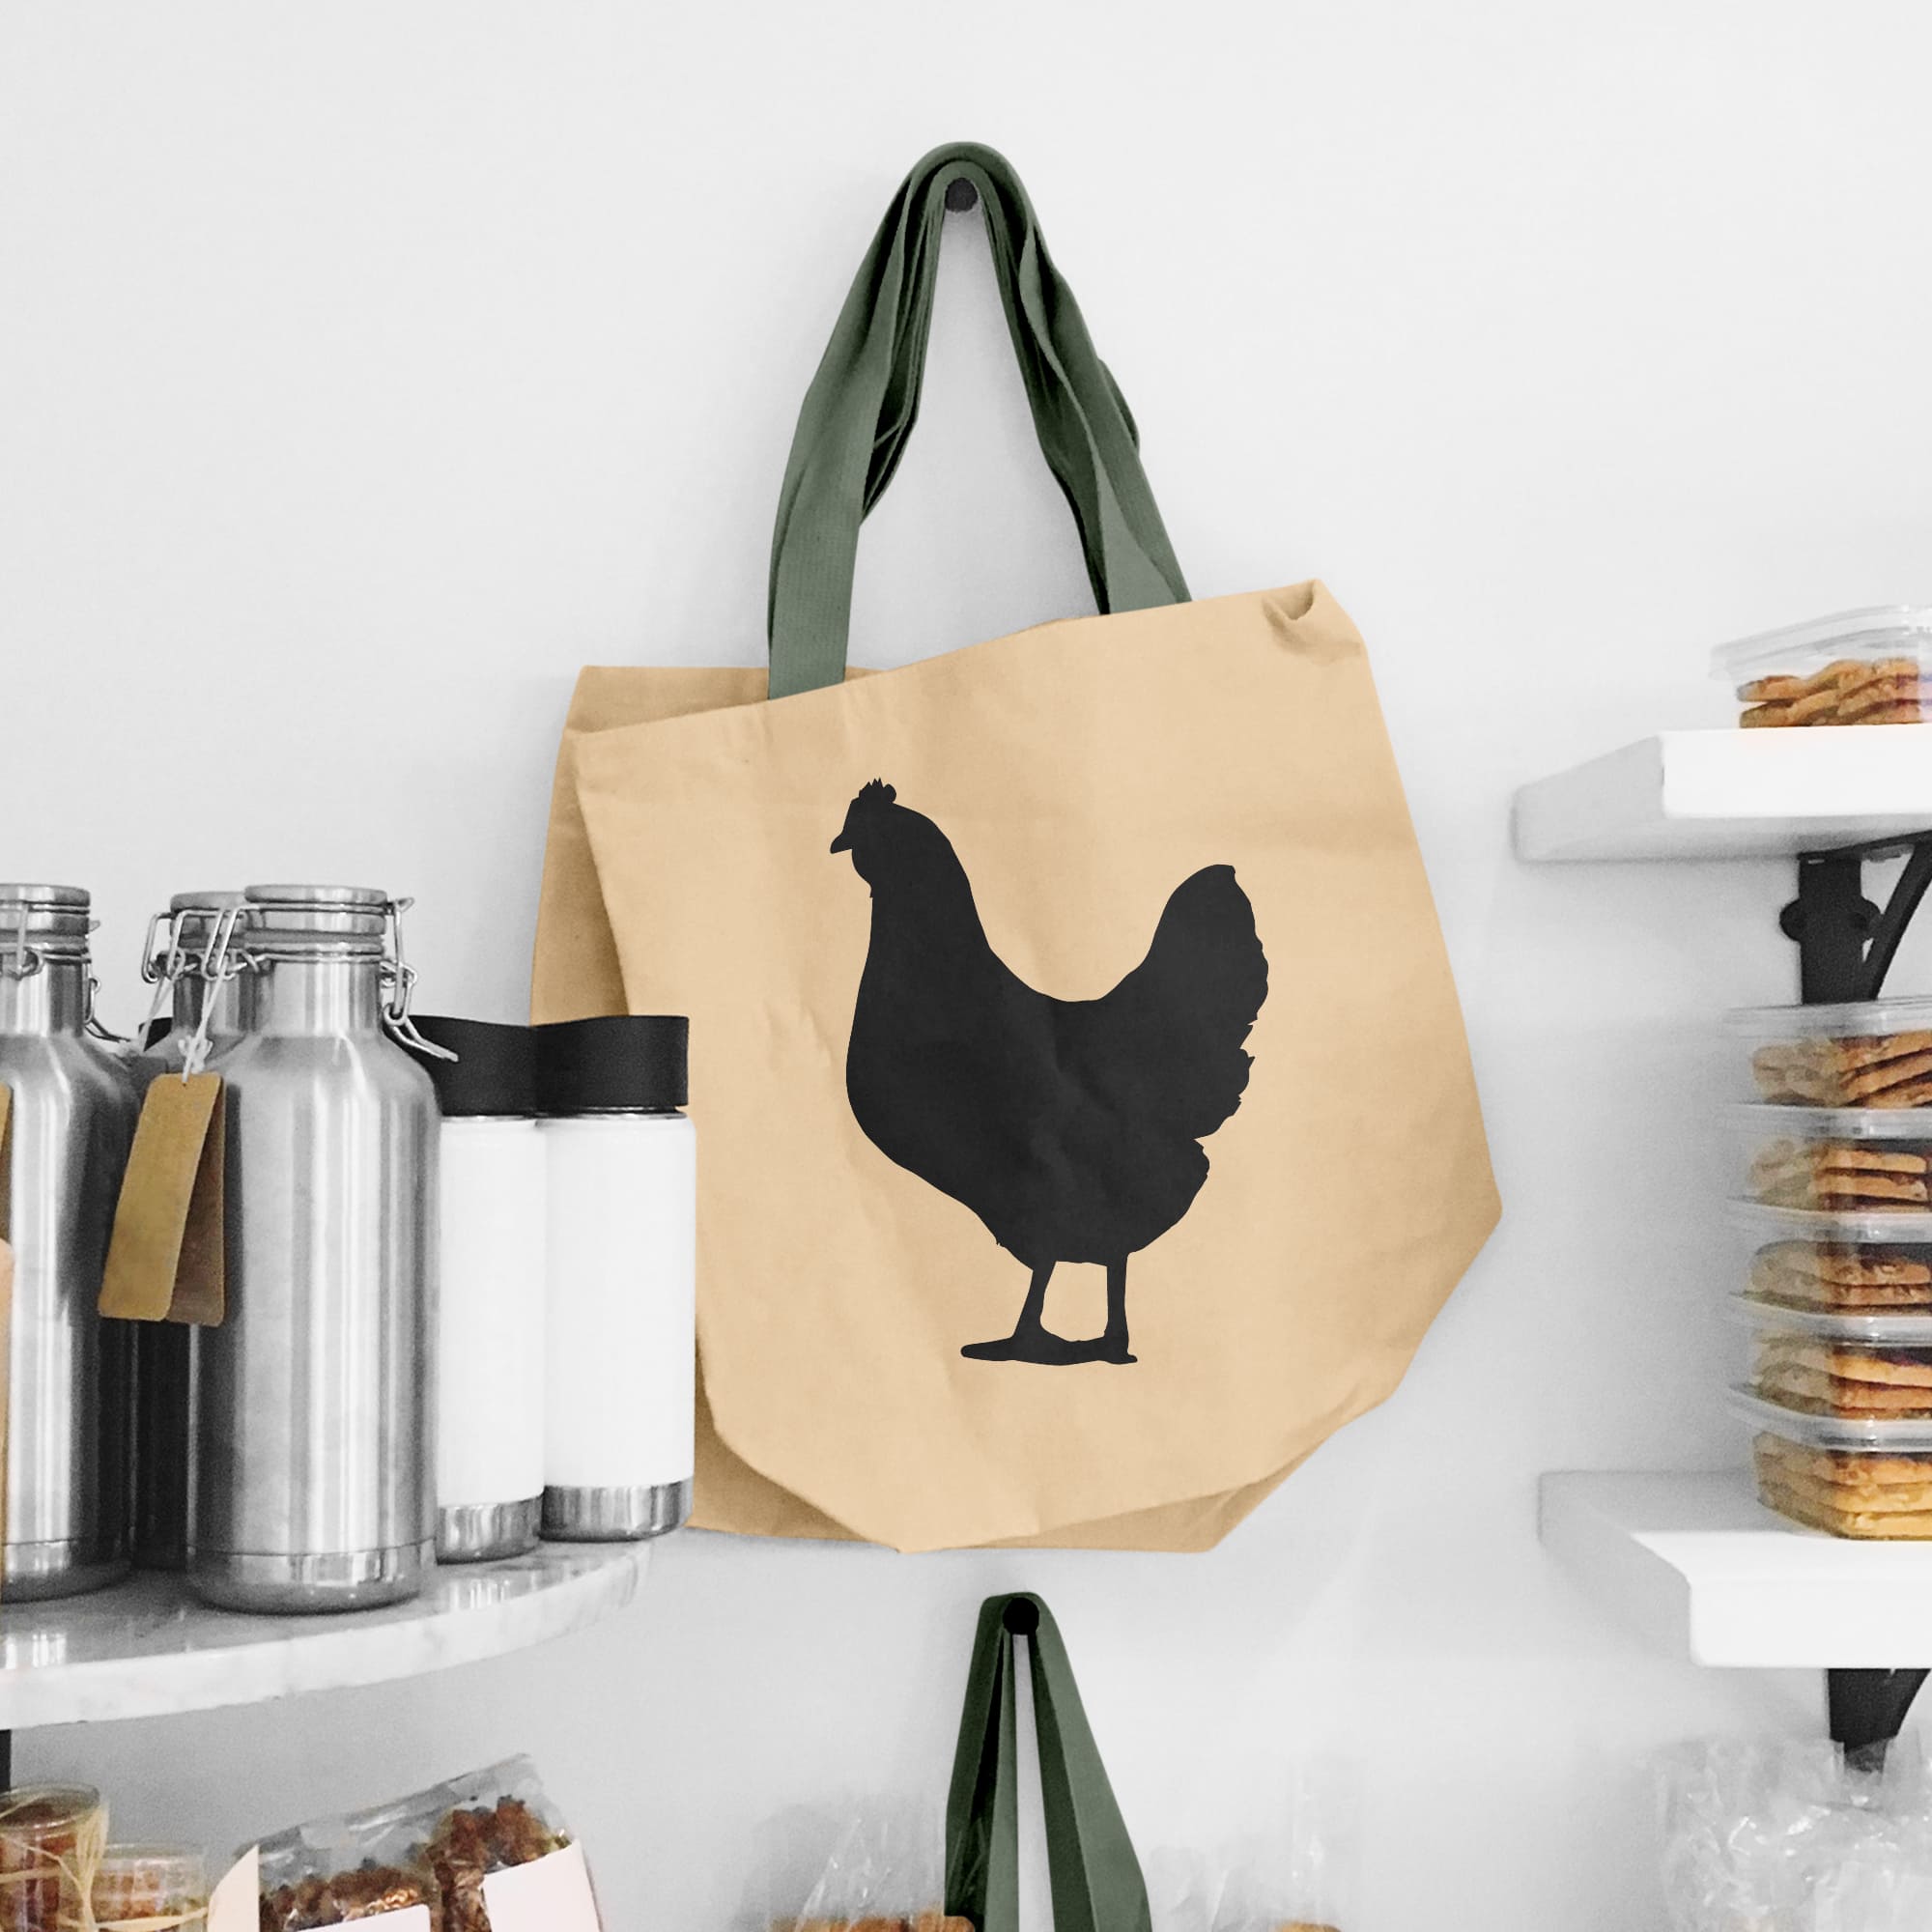 Bag with a chicken on it hanging on a wall.